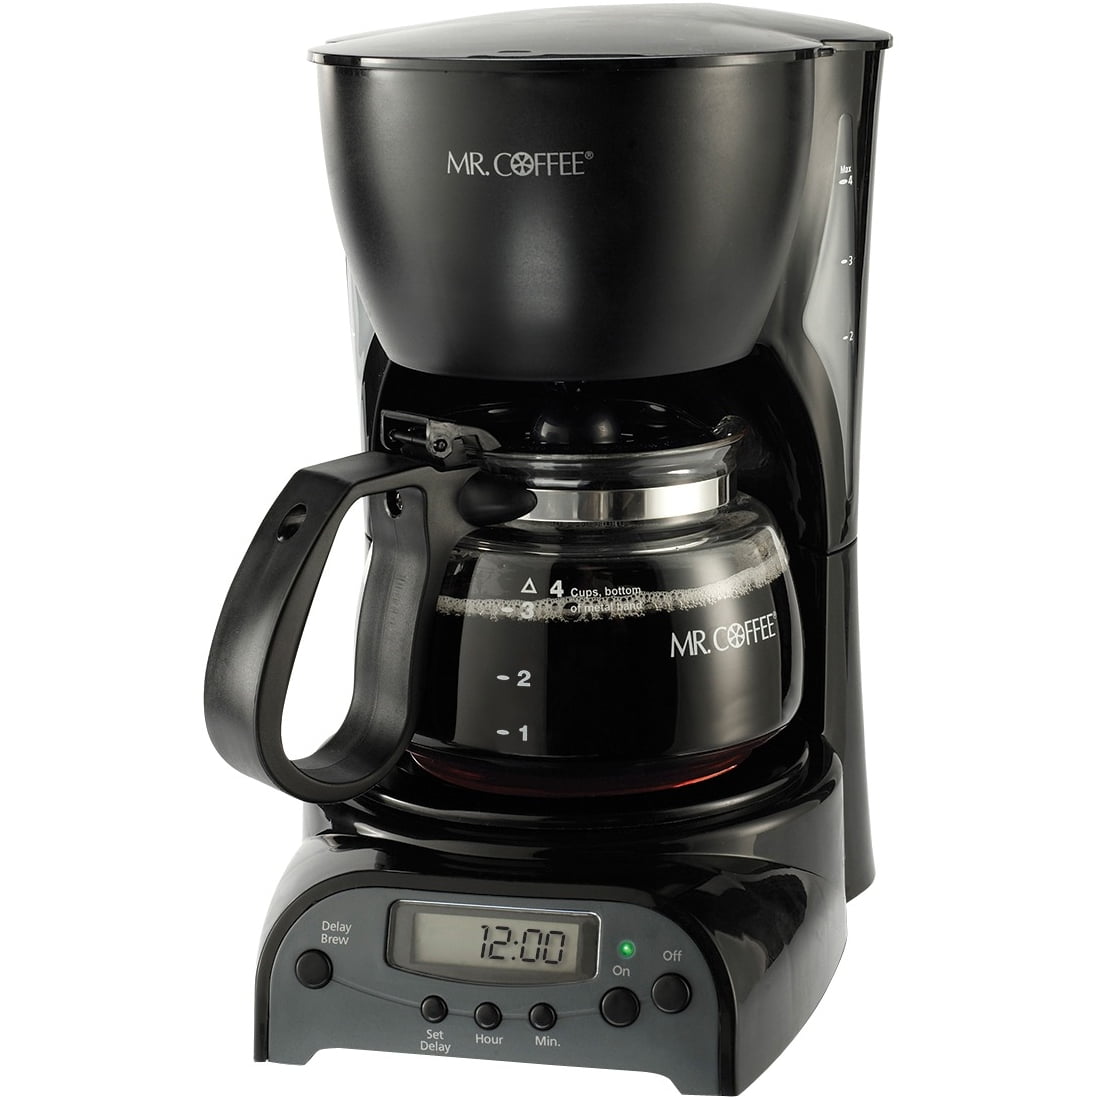 Mr. Coffee 4-Cup Programmable Coffee Maker, Black, 1 ct